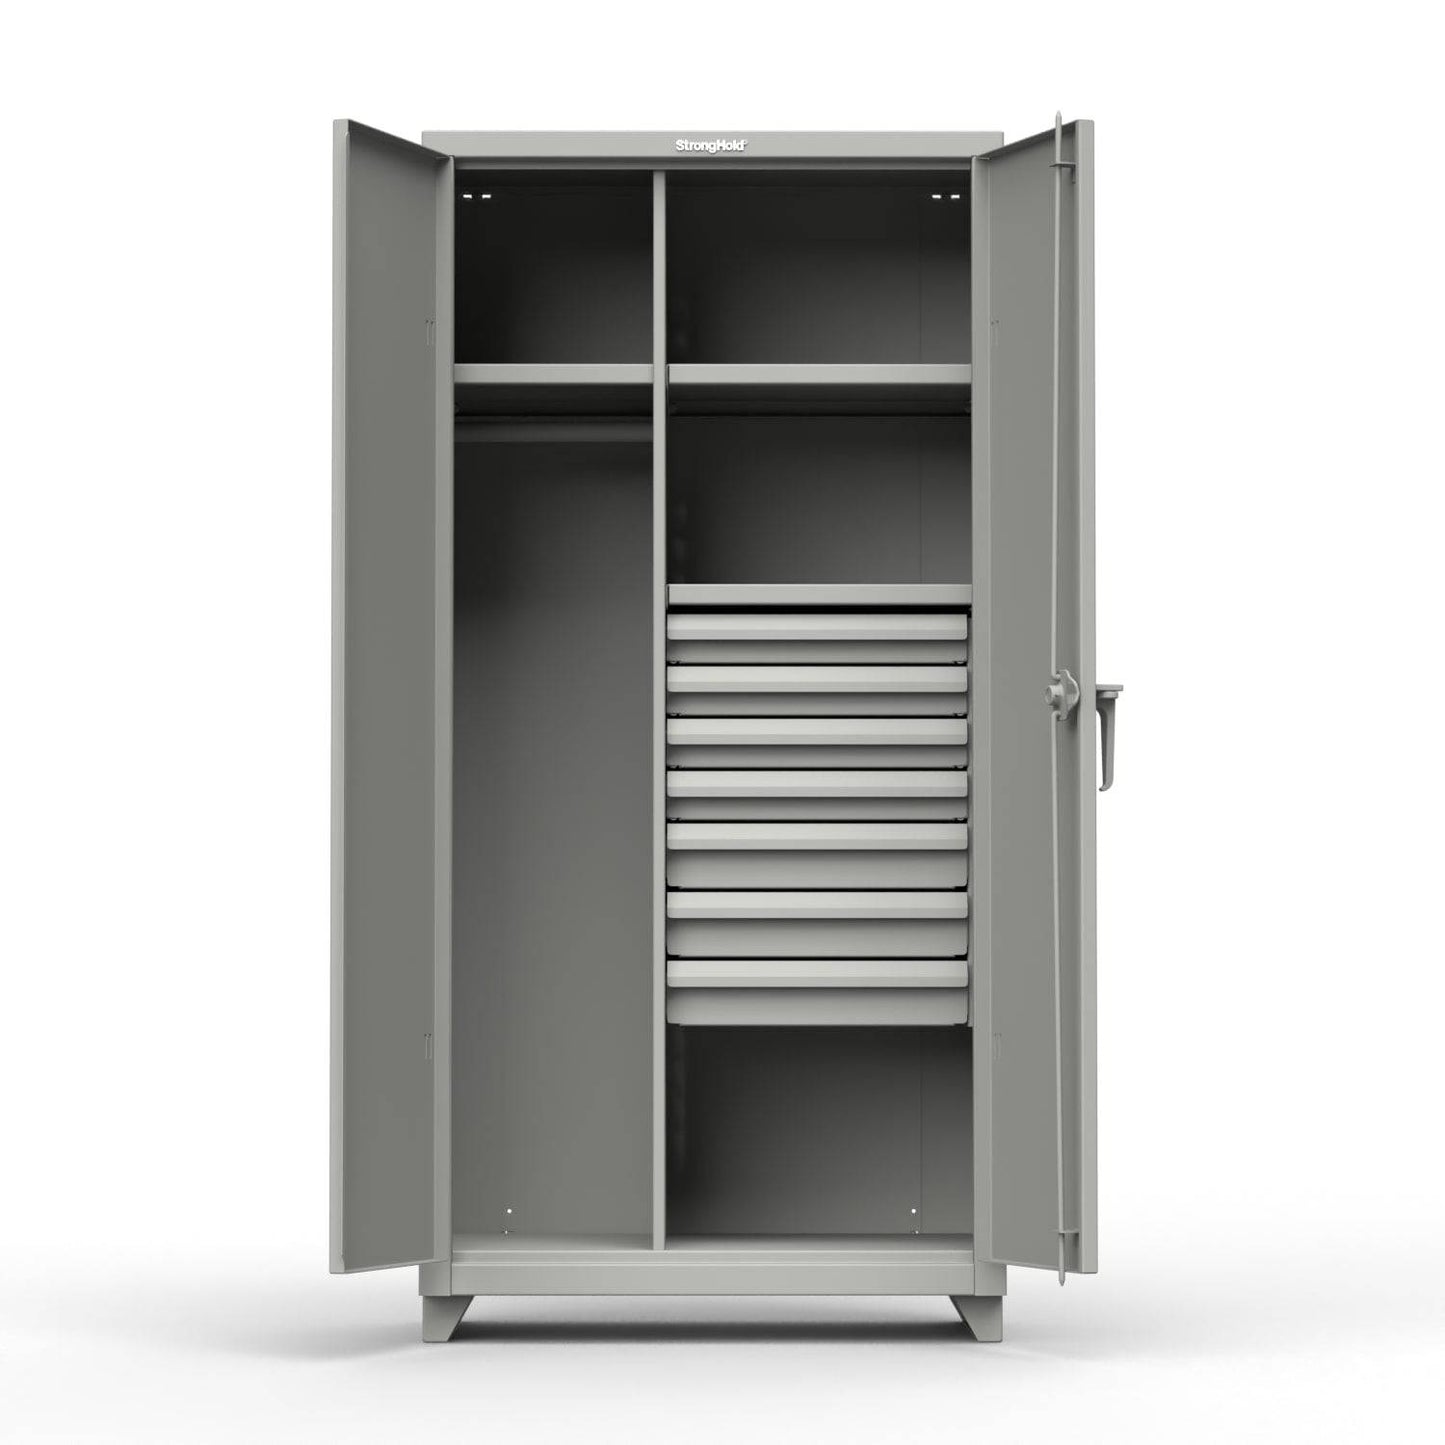 Extra Heavy Duty 14 GA Uniform Cabinet with 7 Drawers, 3 Shelves - 36 In. W x 24 In. D x 75 In. H - Strong Hold